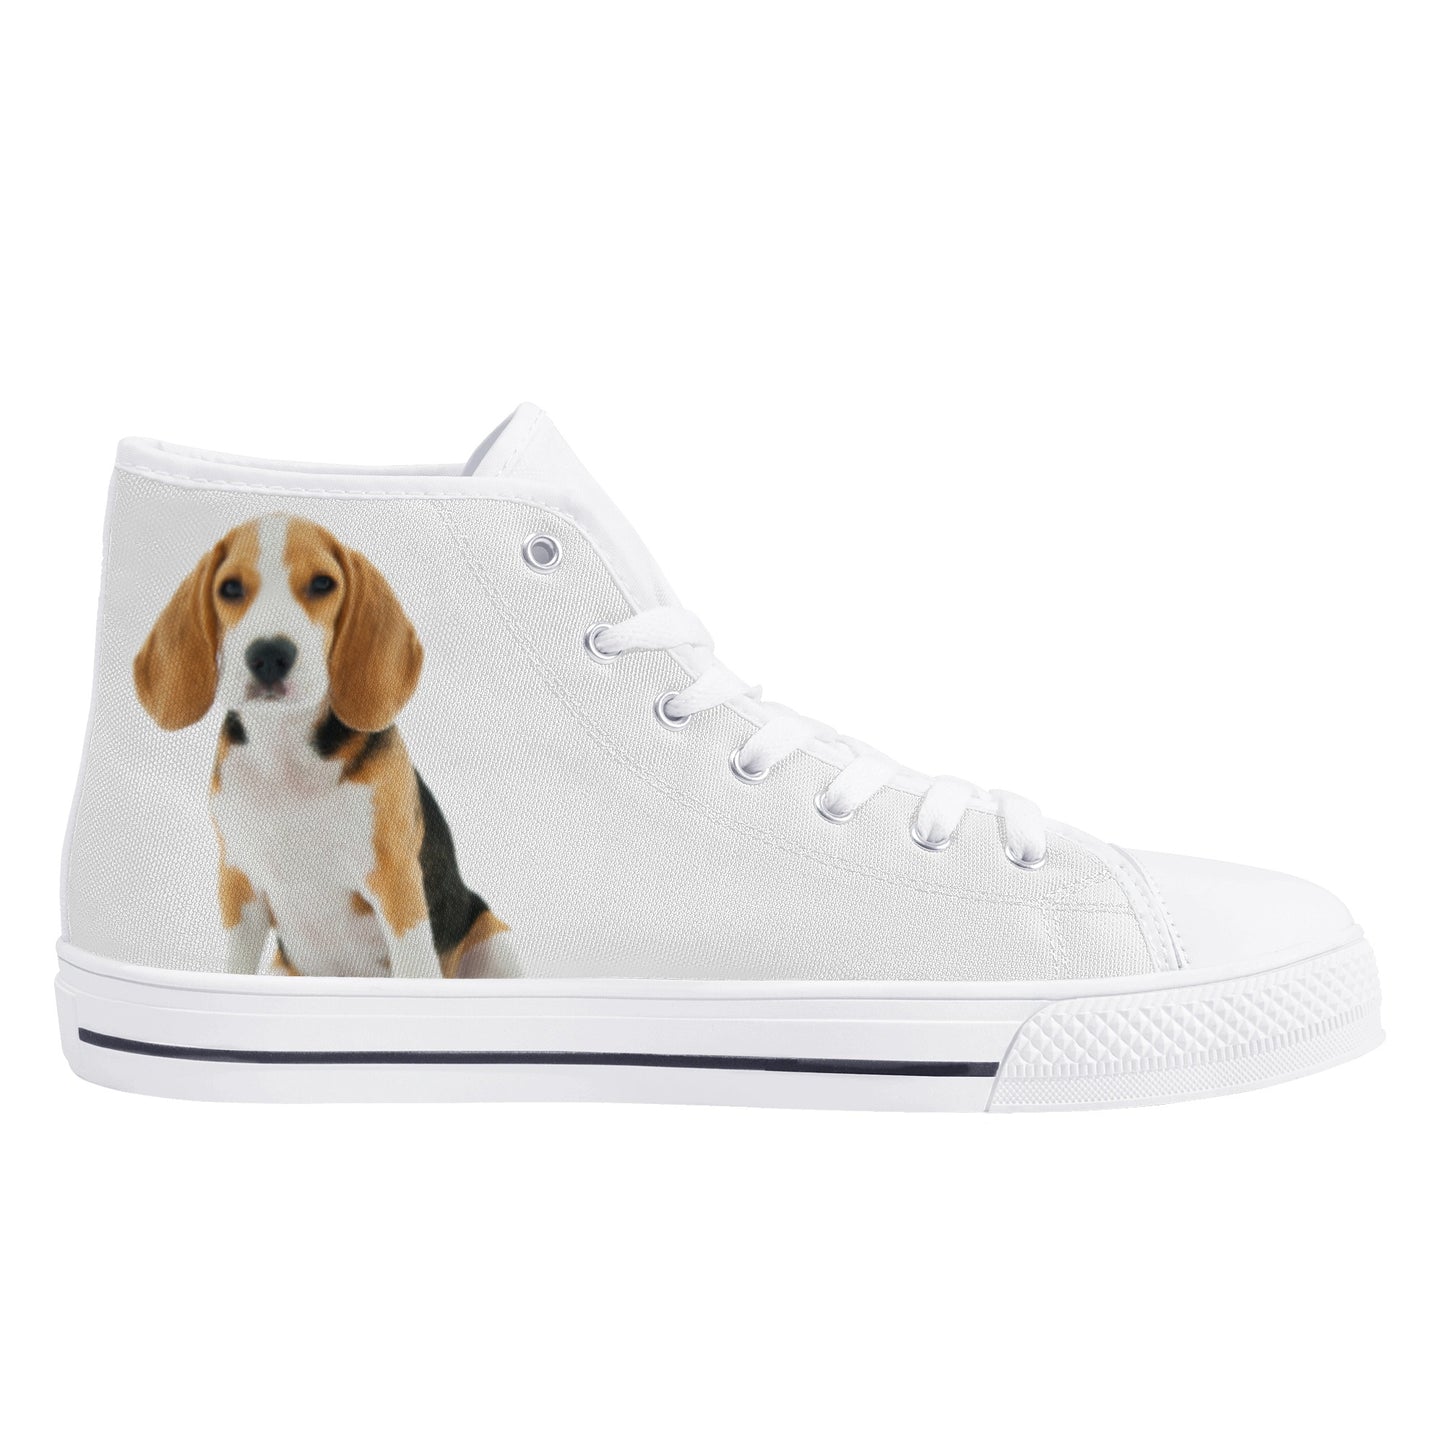 Custom Dog Photo Women Shoes, Pet Face Print Personalized Design High Top Canvas Lace Up Sneakers Gift Starcove Fashion